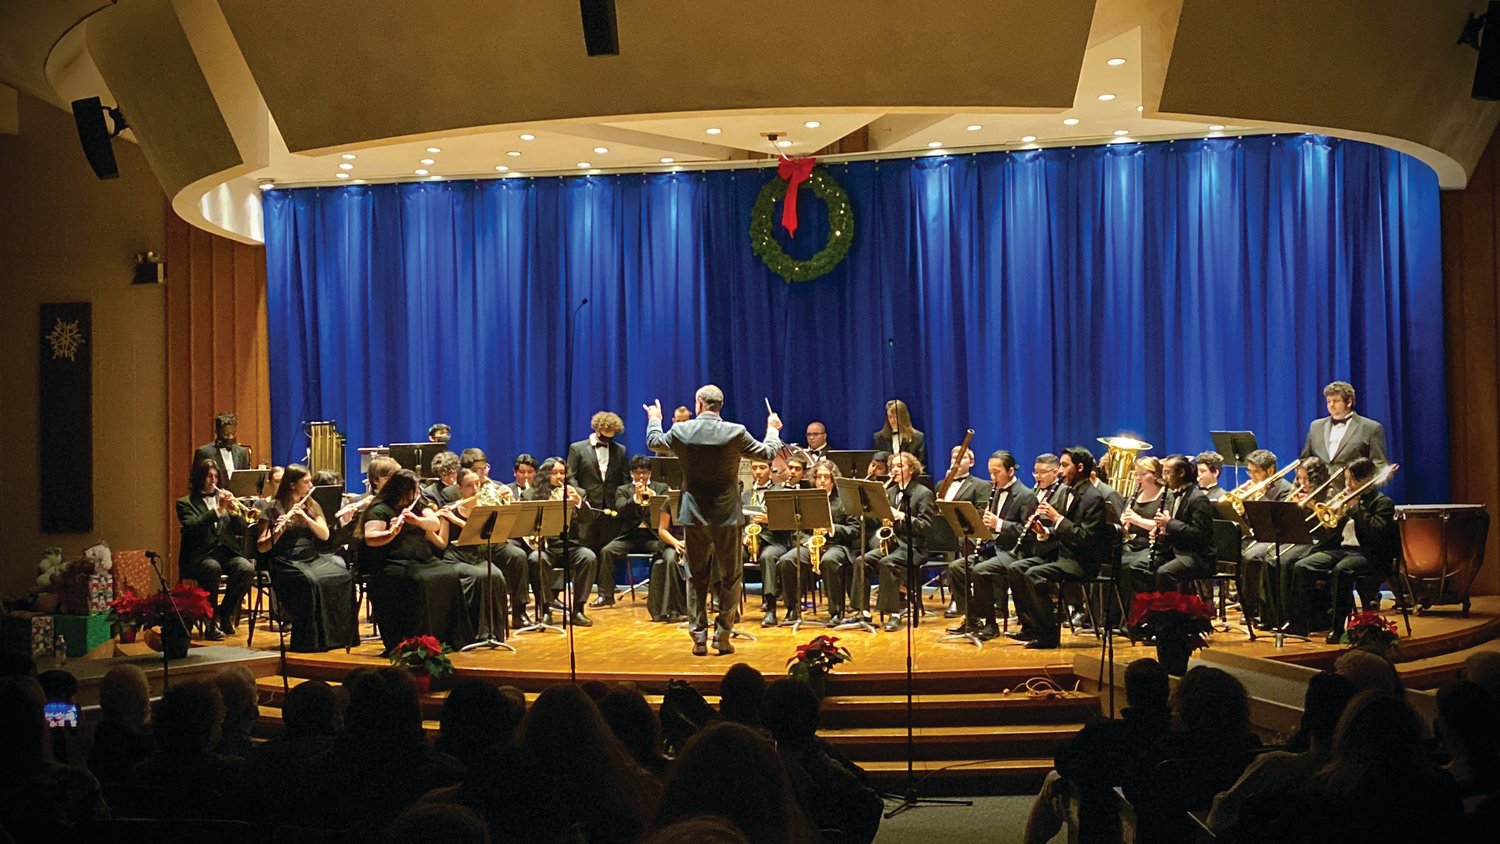 SUPER SPECIAL SOUNDS: JHS Music Department Ron Lamoureux leads the Panther band during the recently and highly-entertaining Christmas Concert.